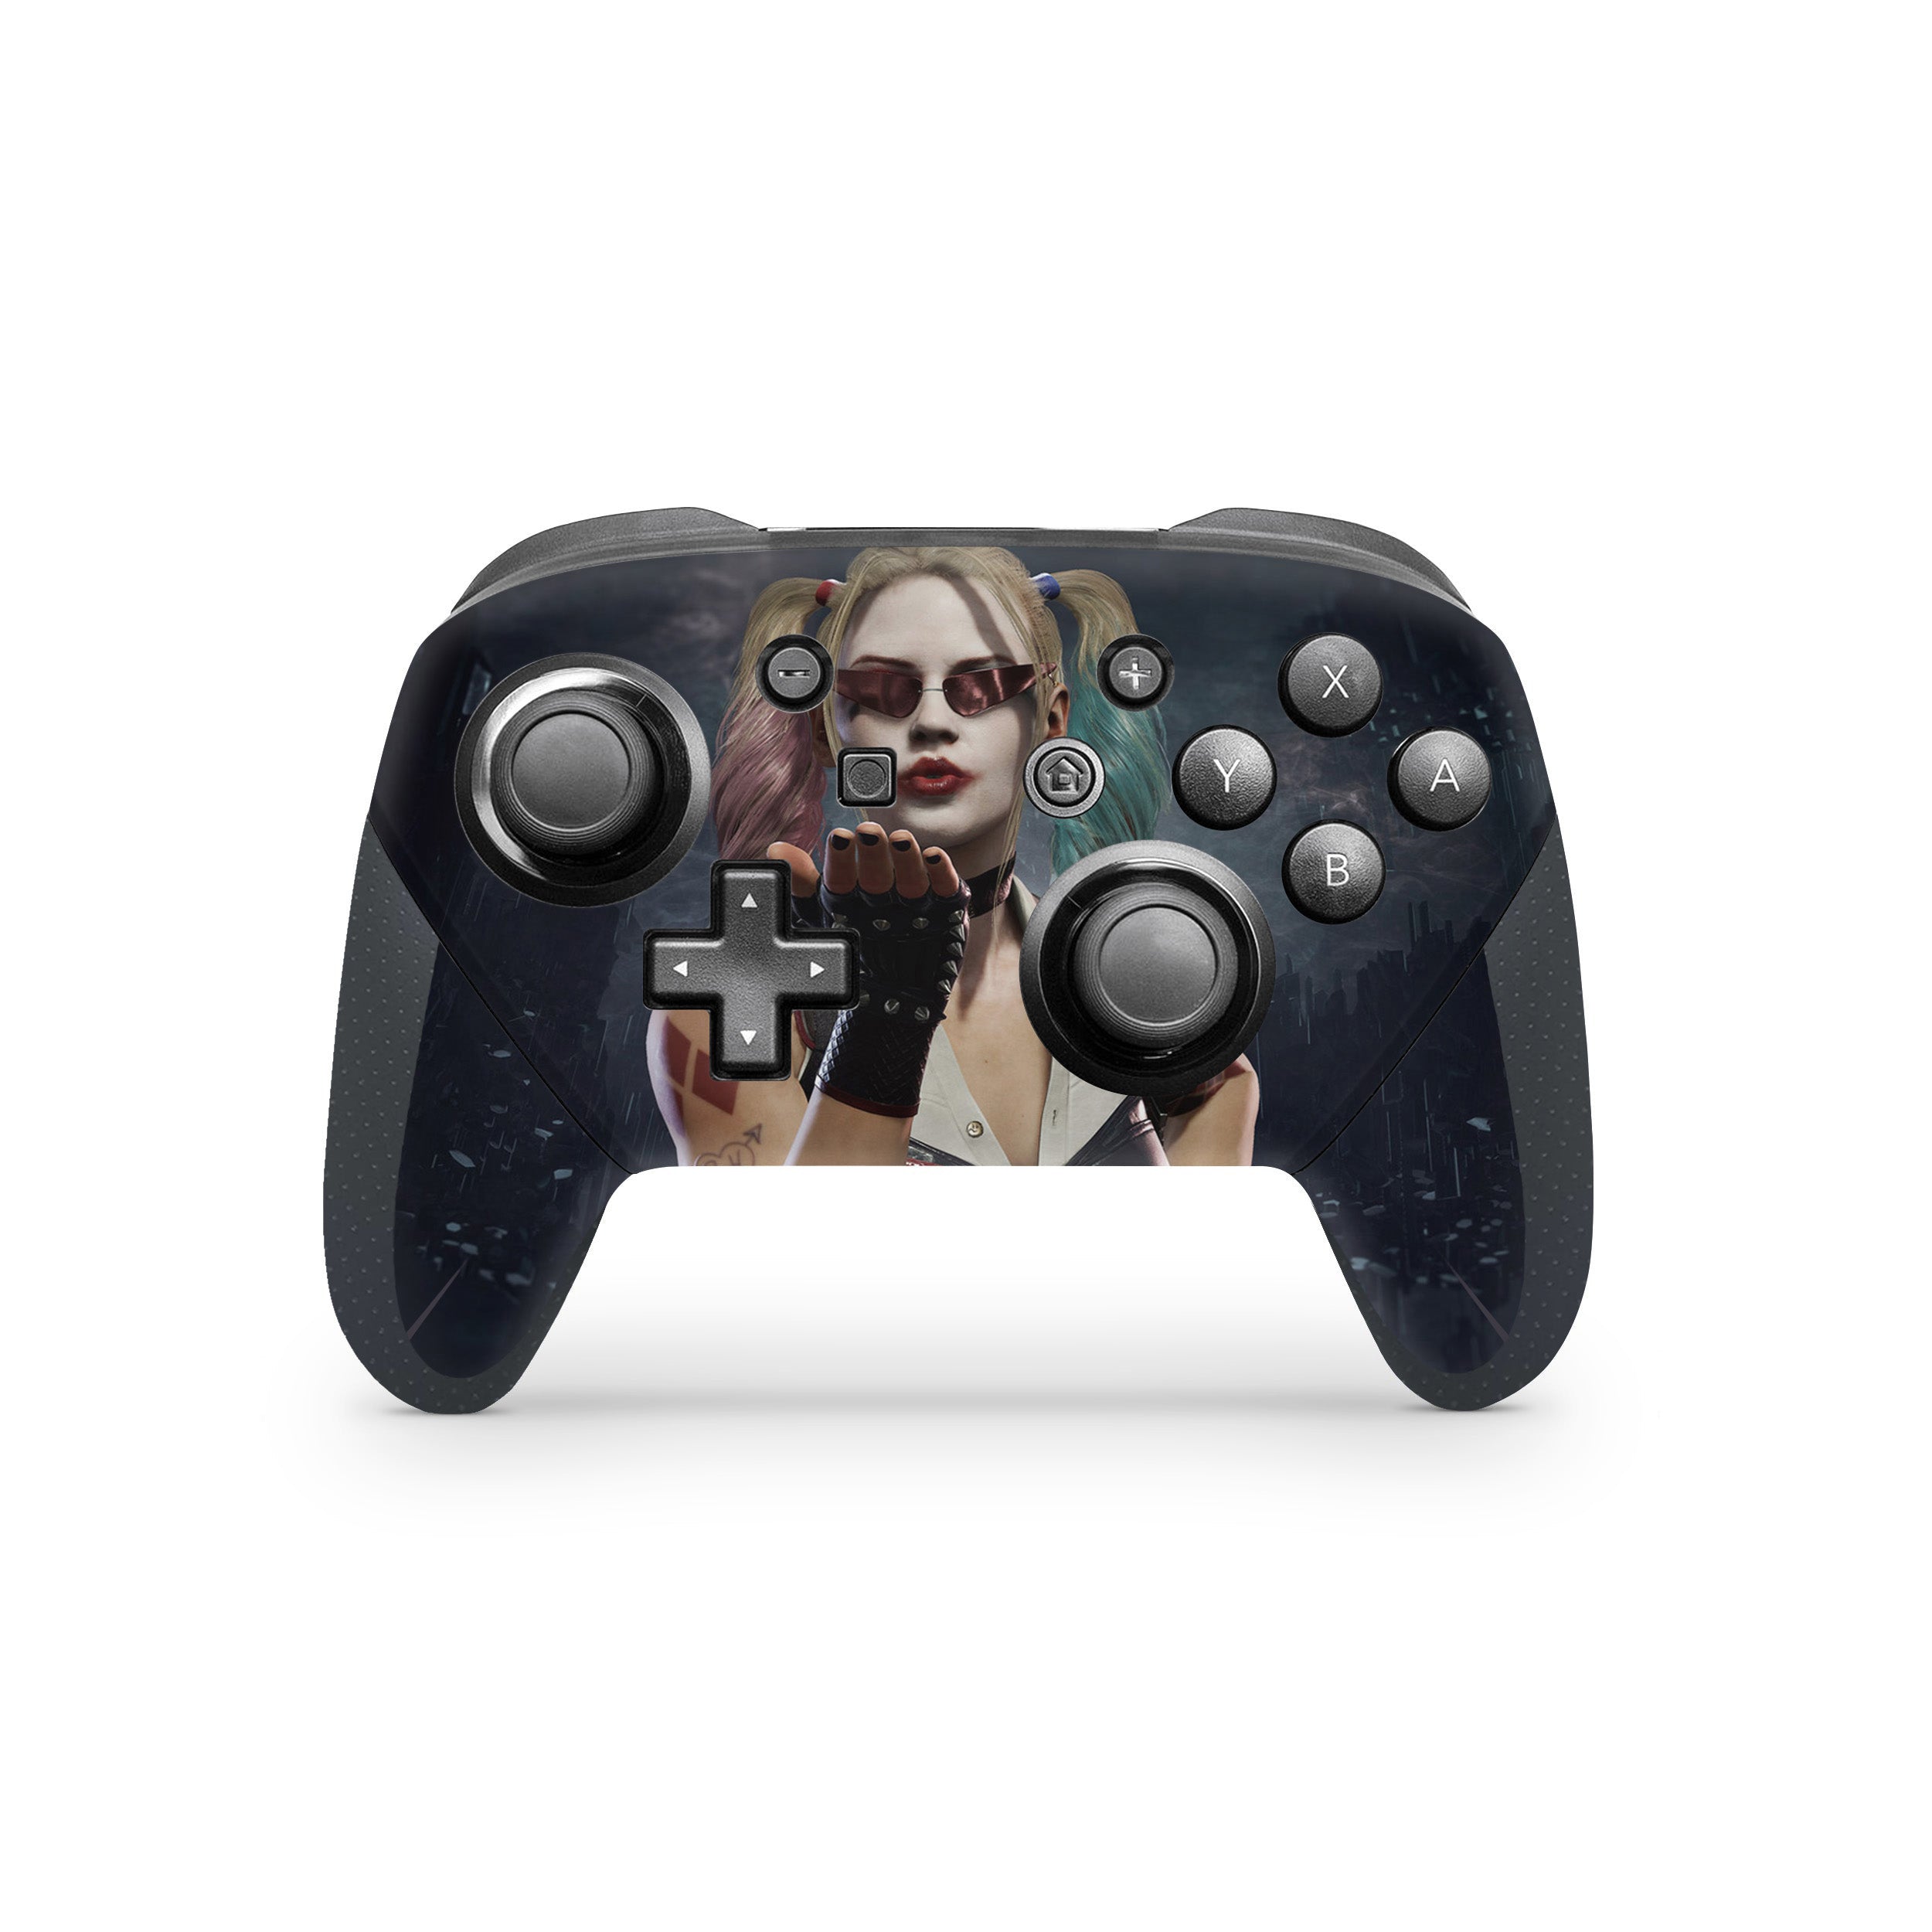 A video game skin featuring a Mortal Kombat 11 Frost design for the Switch Pro Controller.